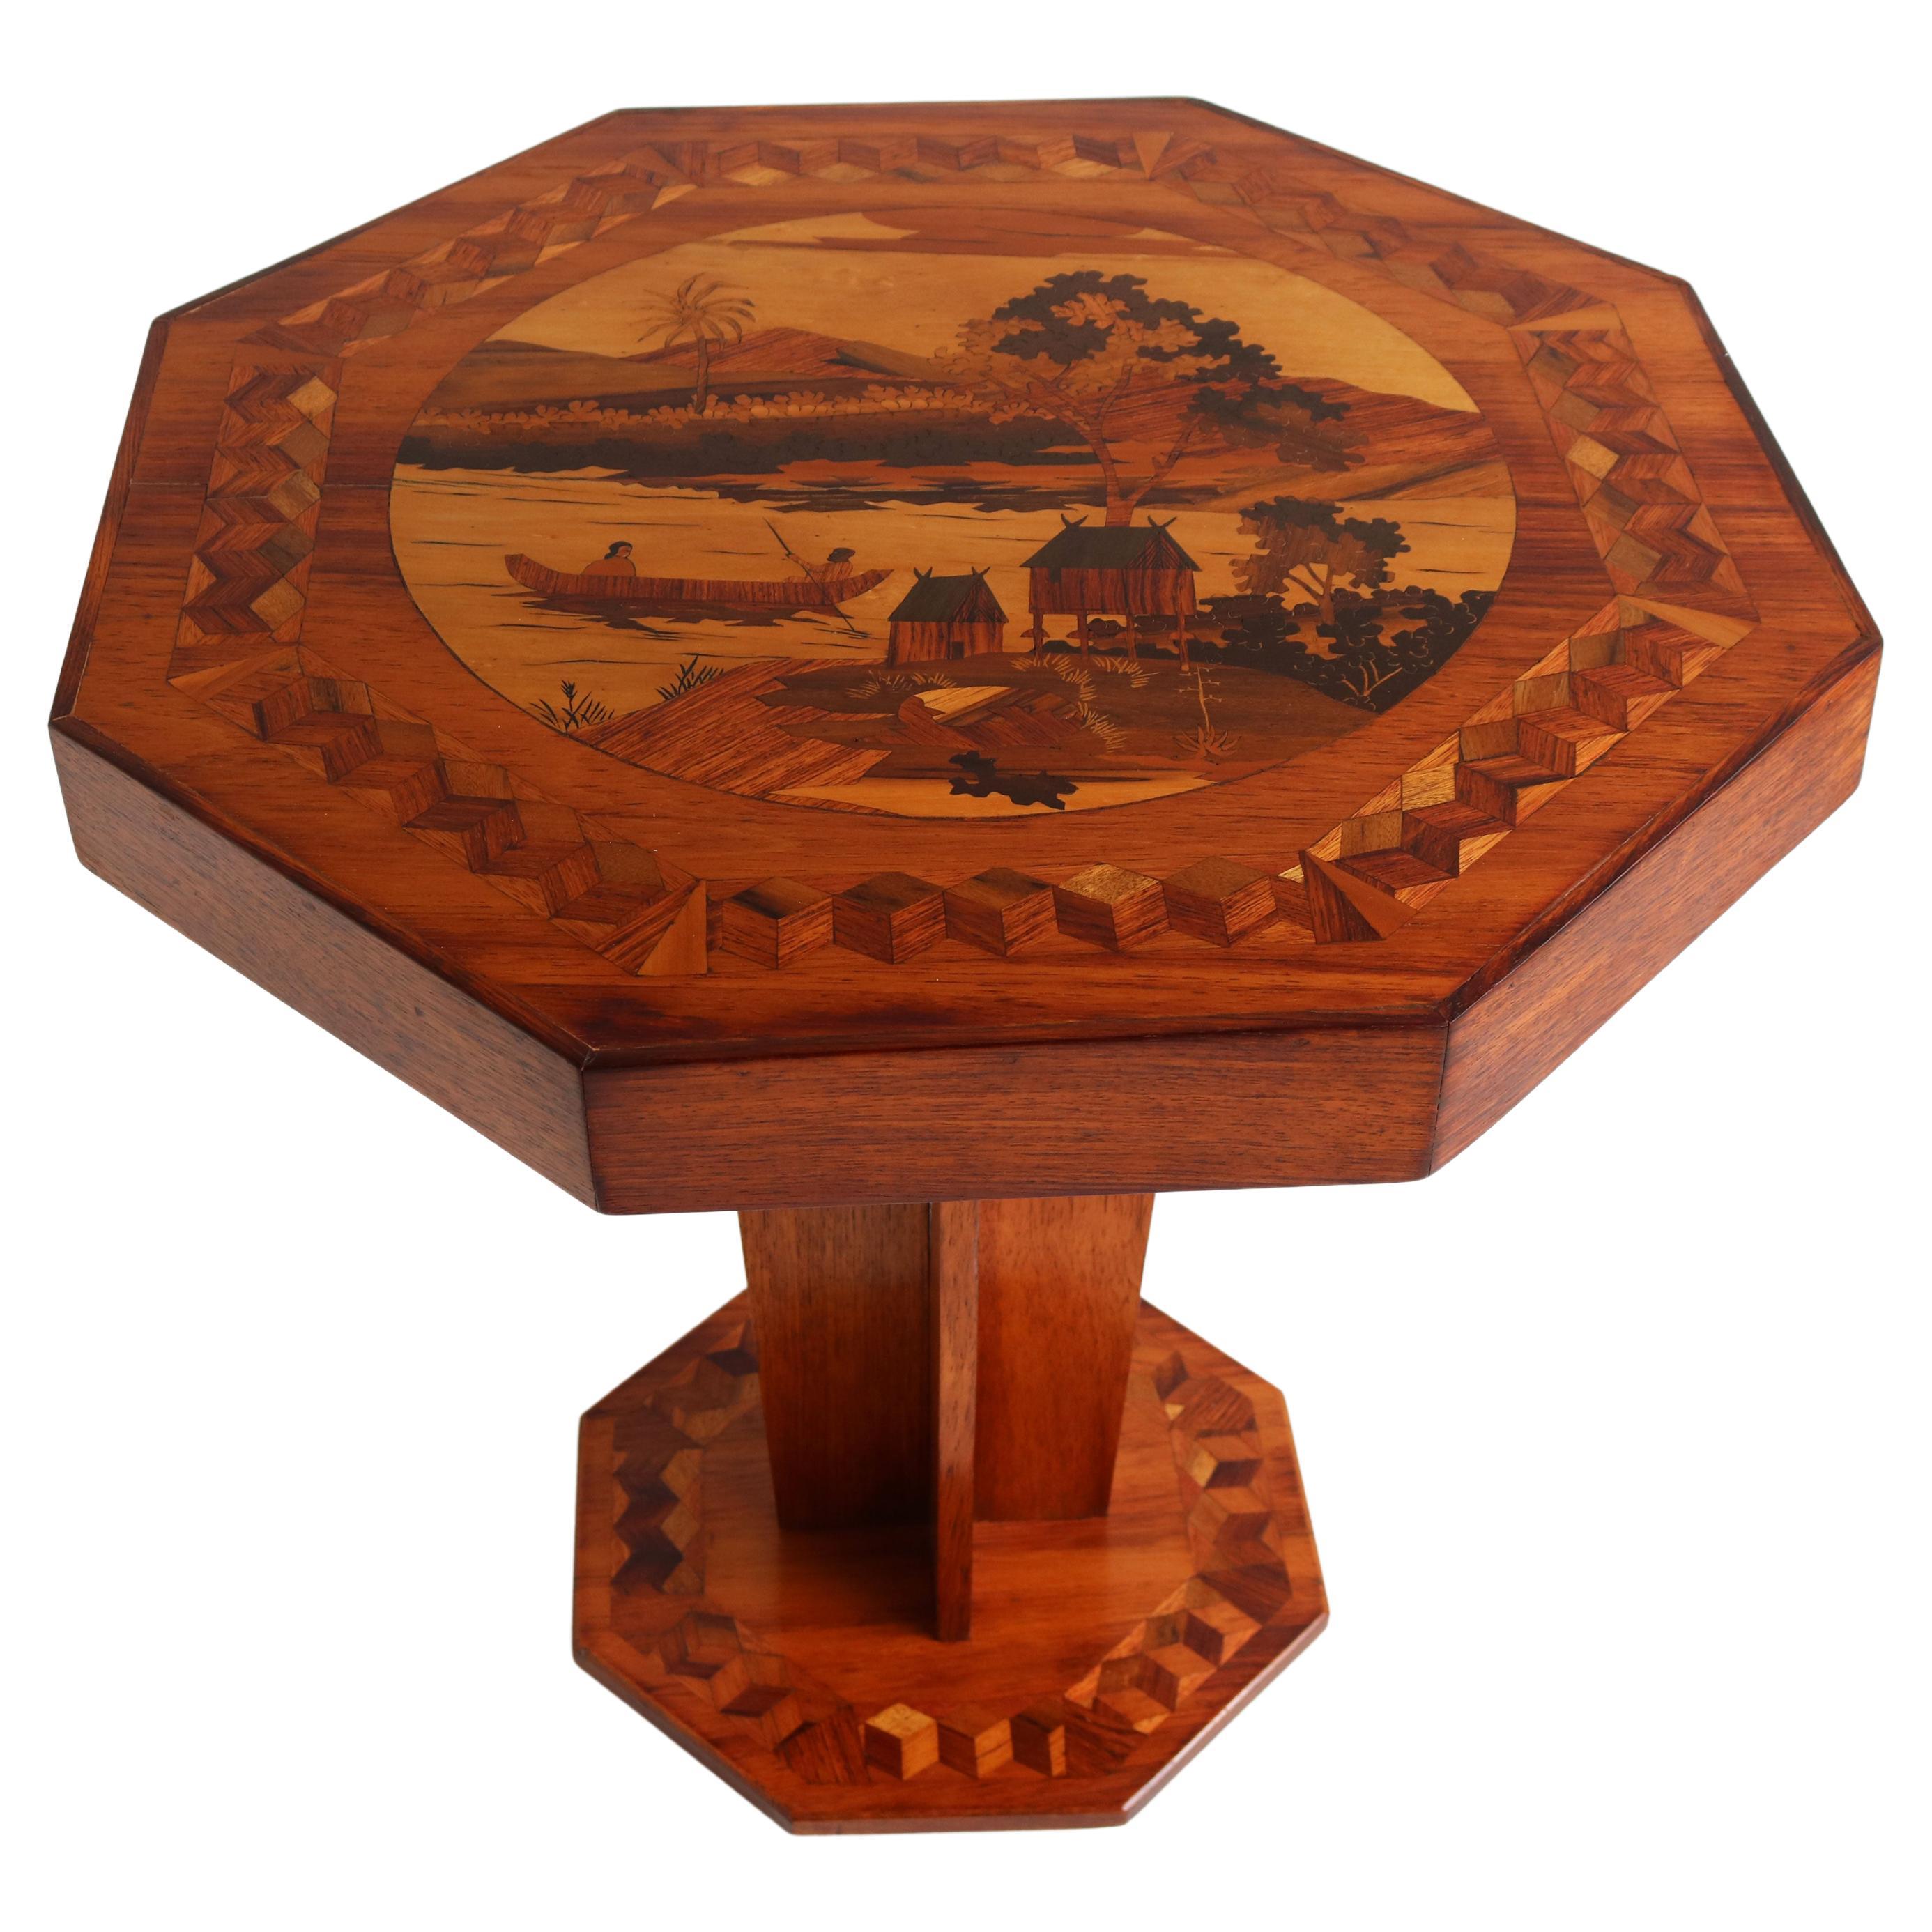 Antique French Art Deco Octagonal Side Table Geometric Oriental scene 1930 inlay